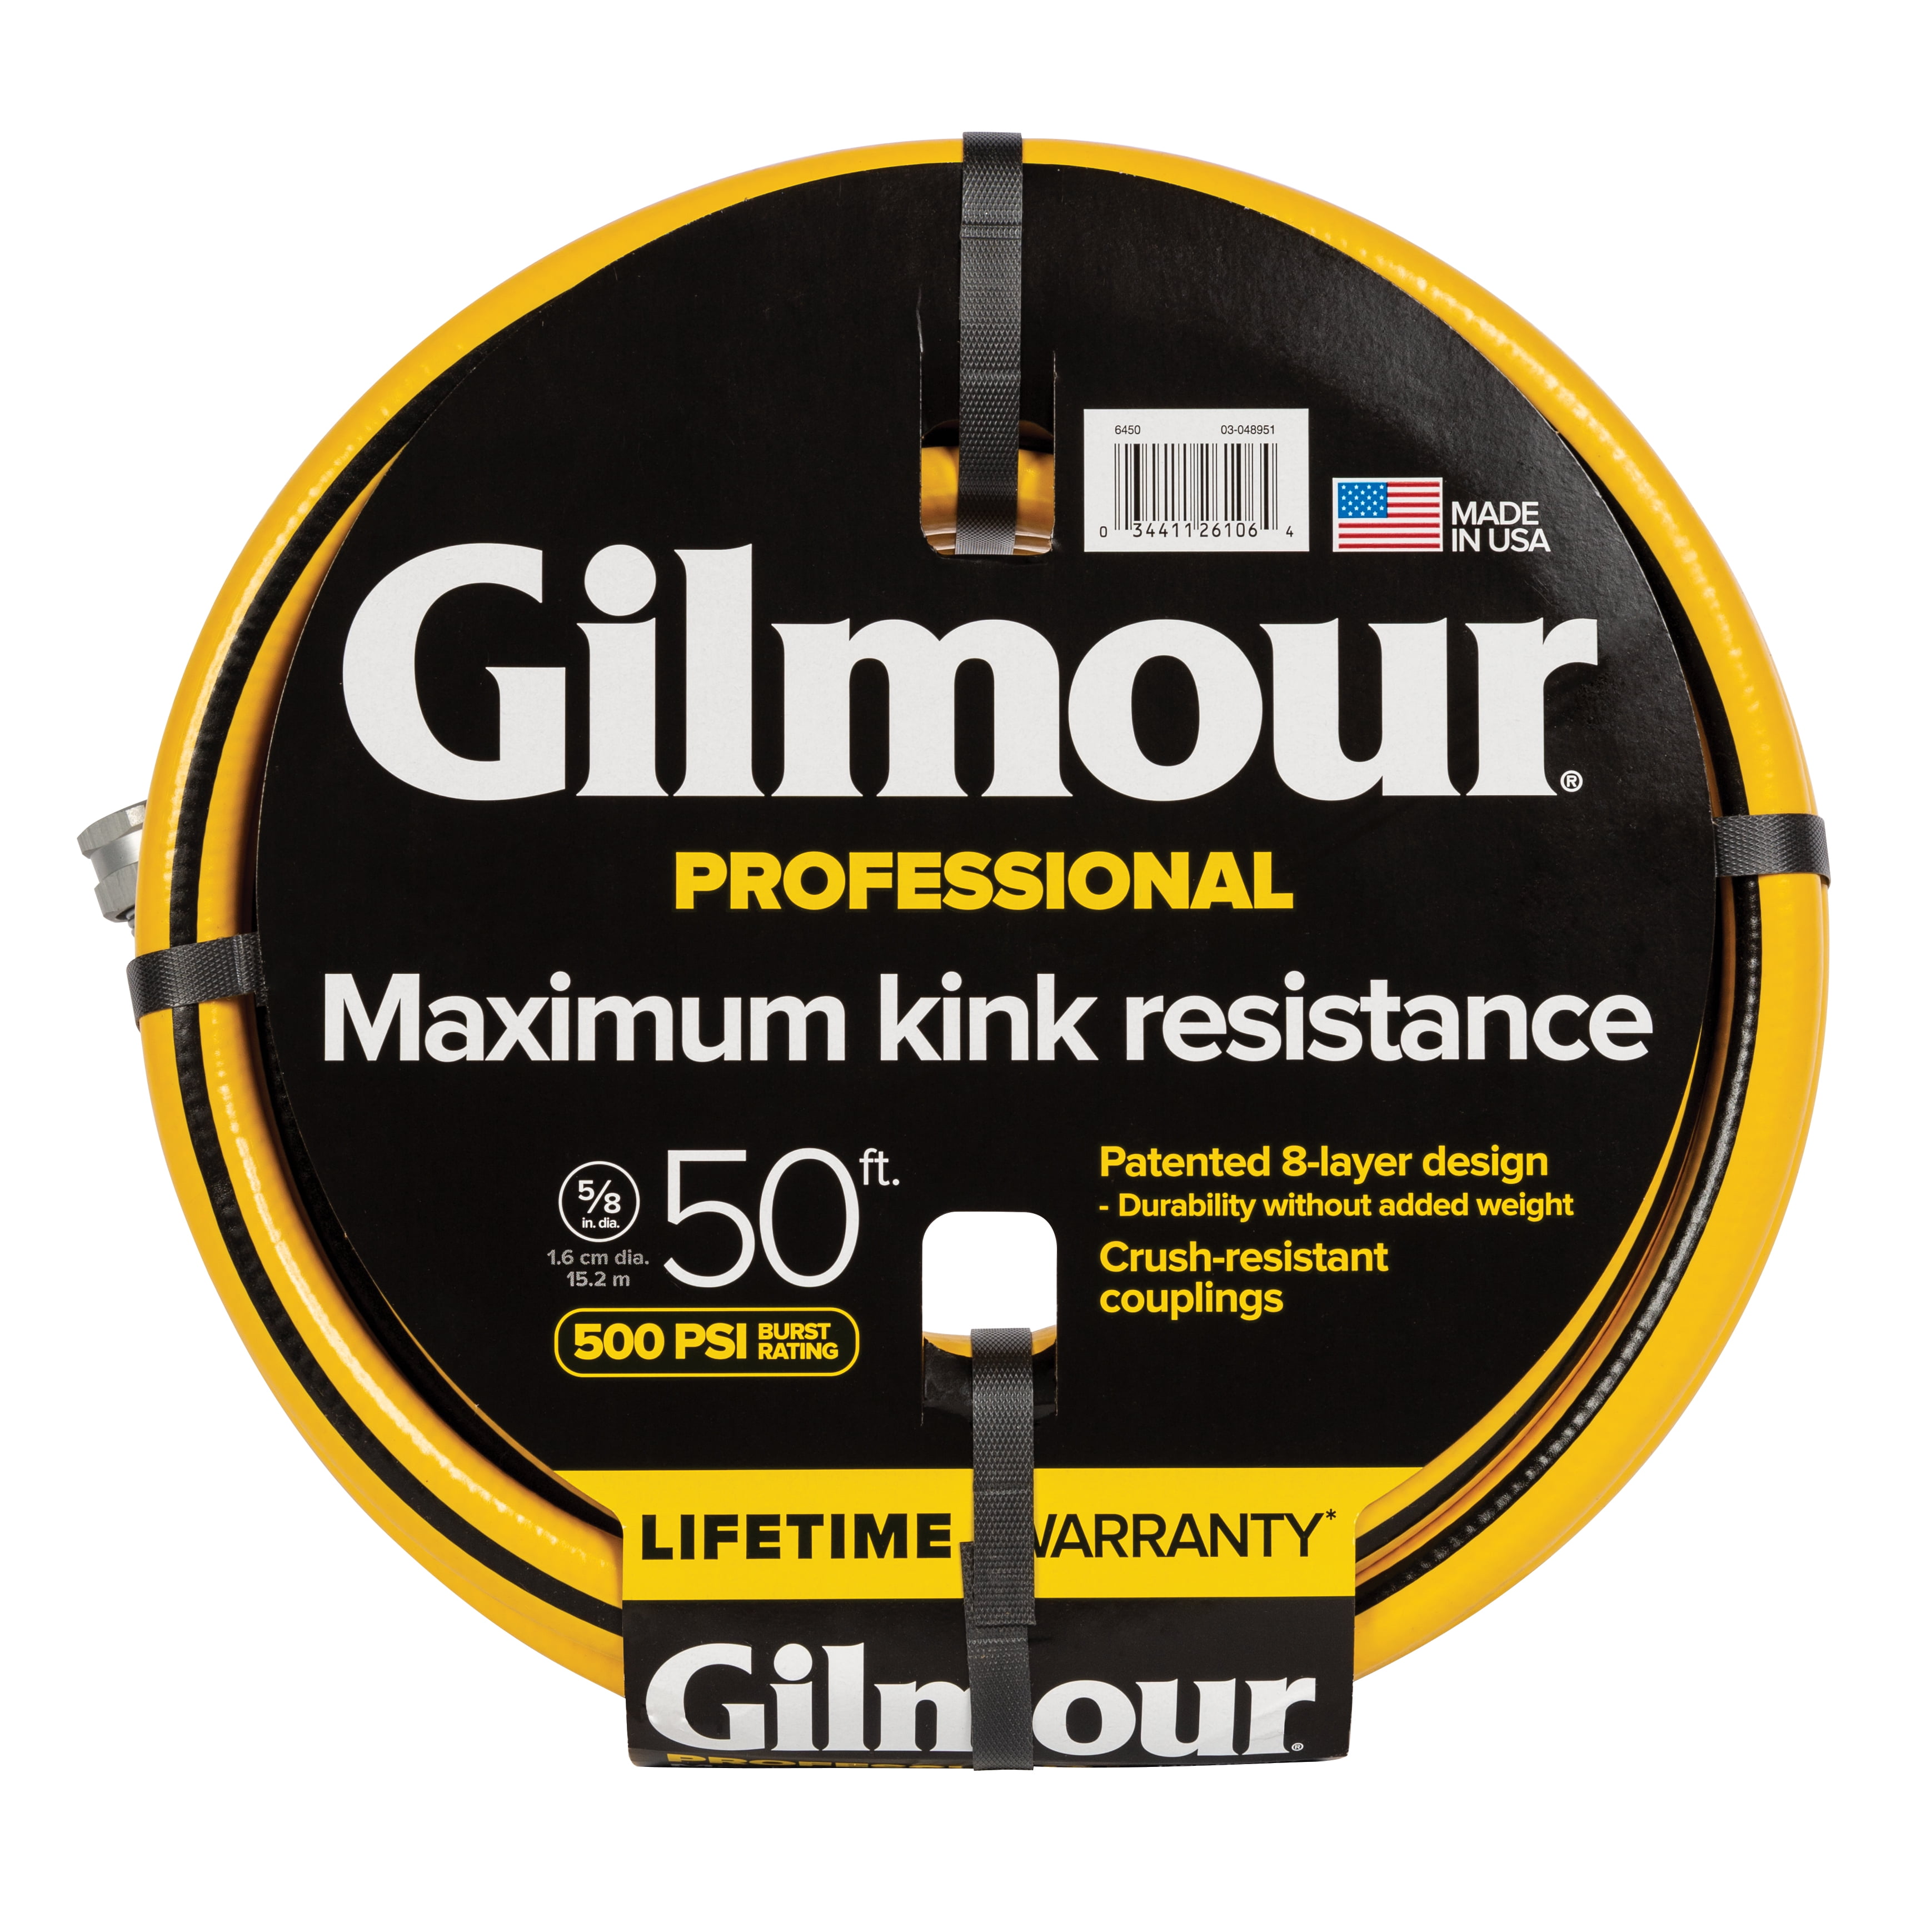 Gilmour Professional Hose 5/8 inch - 50